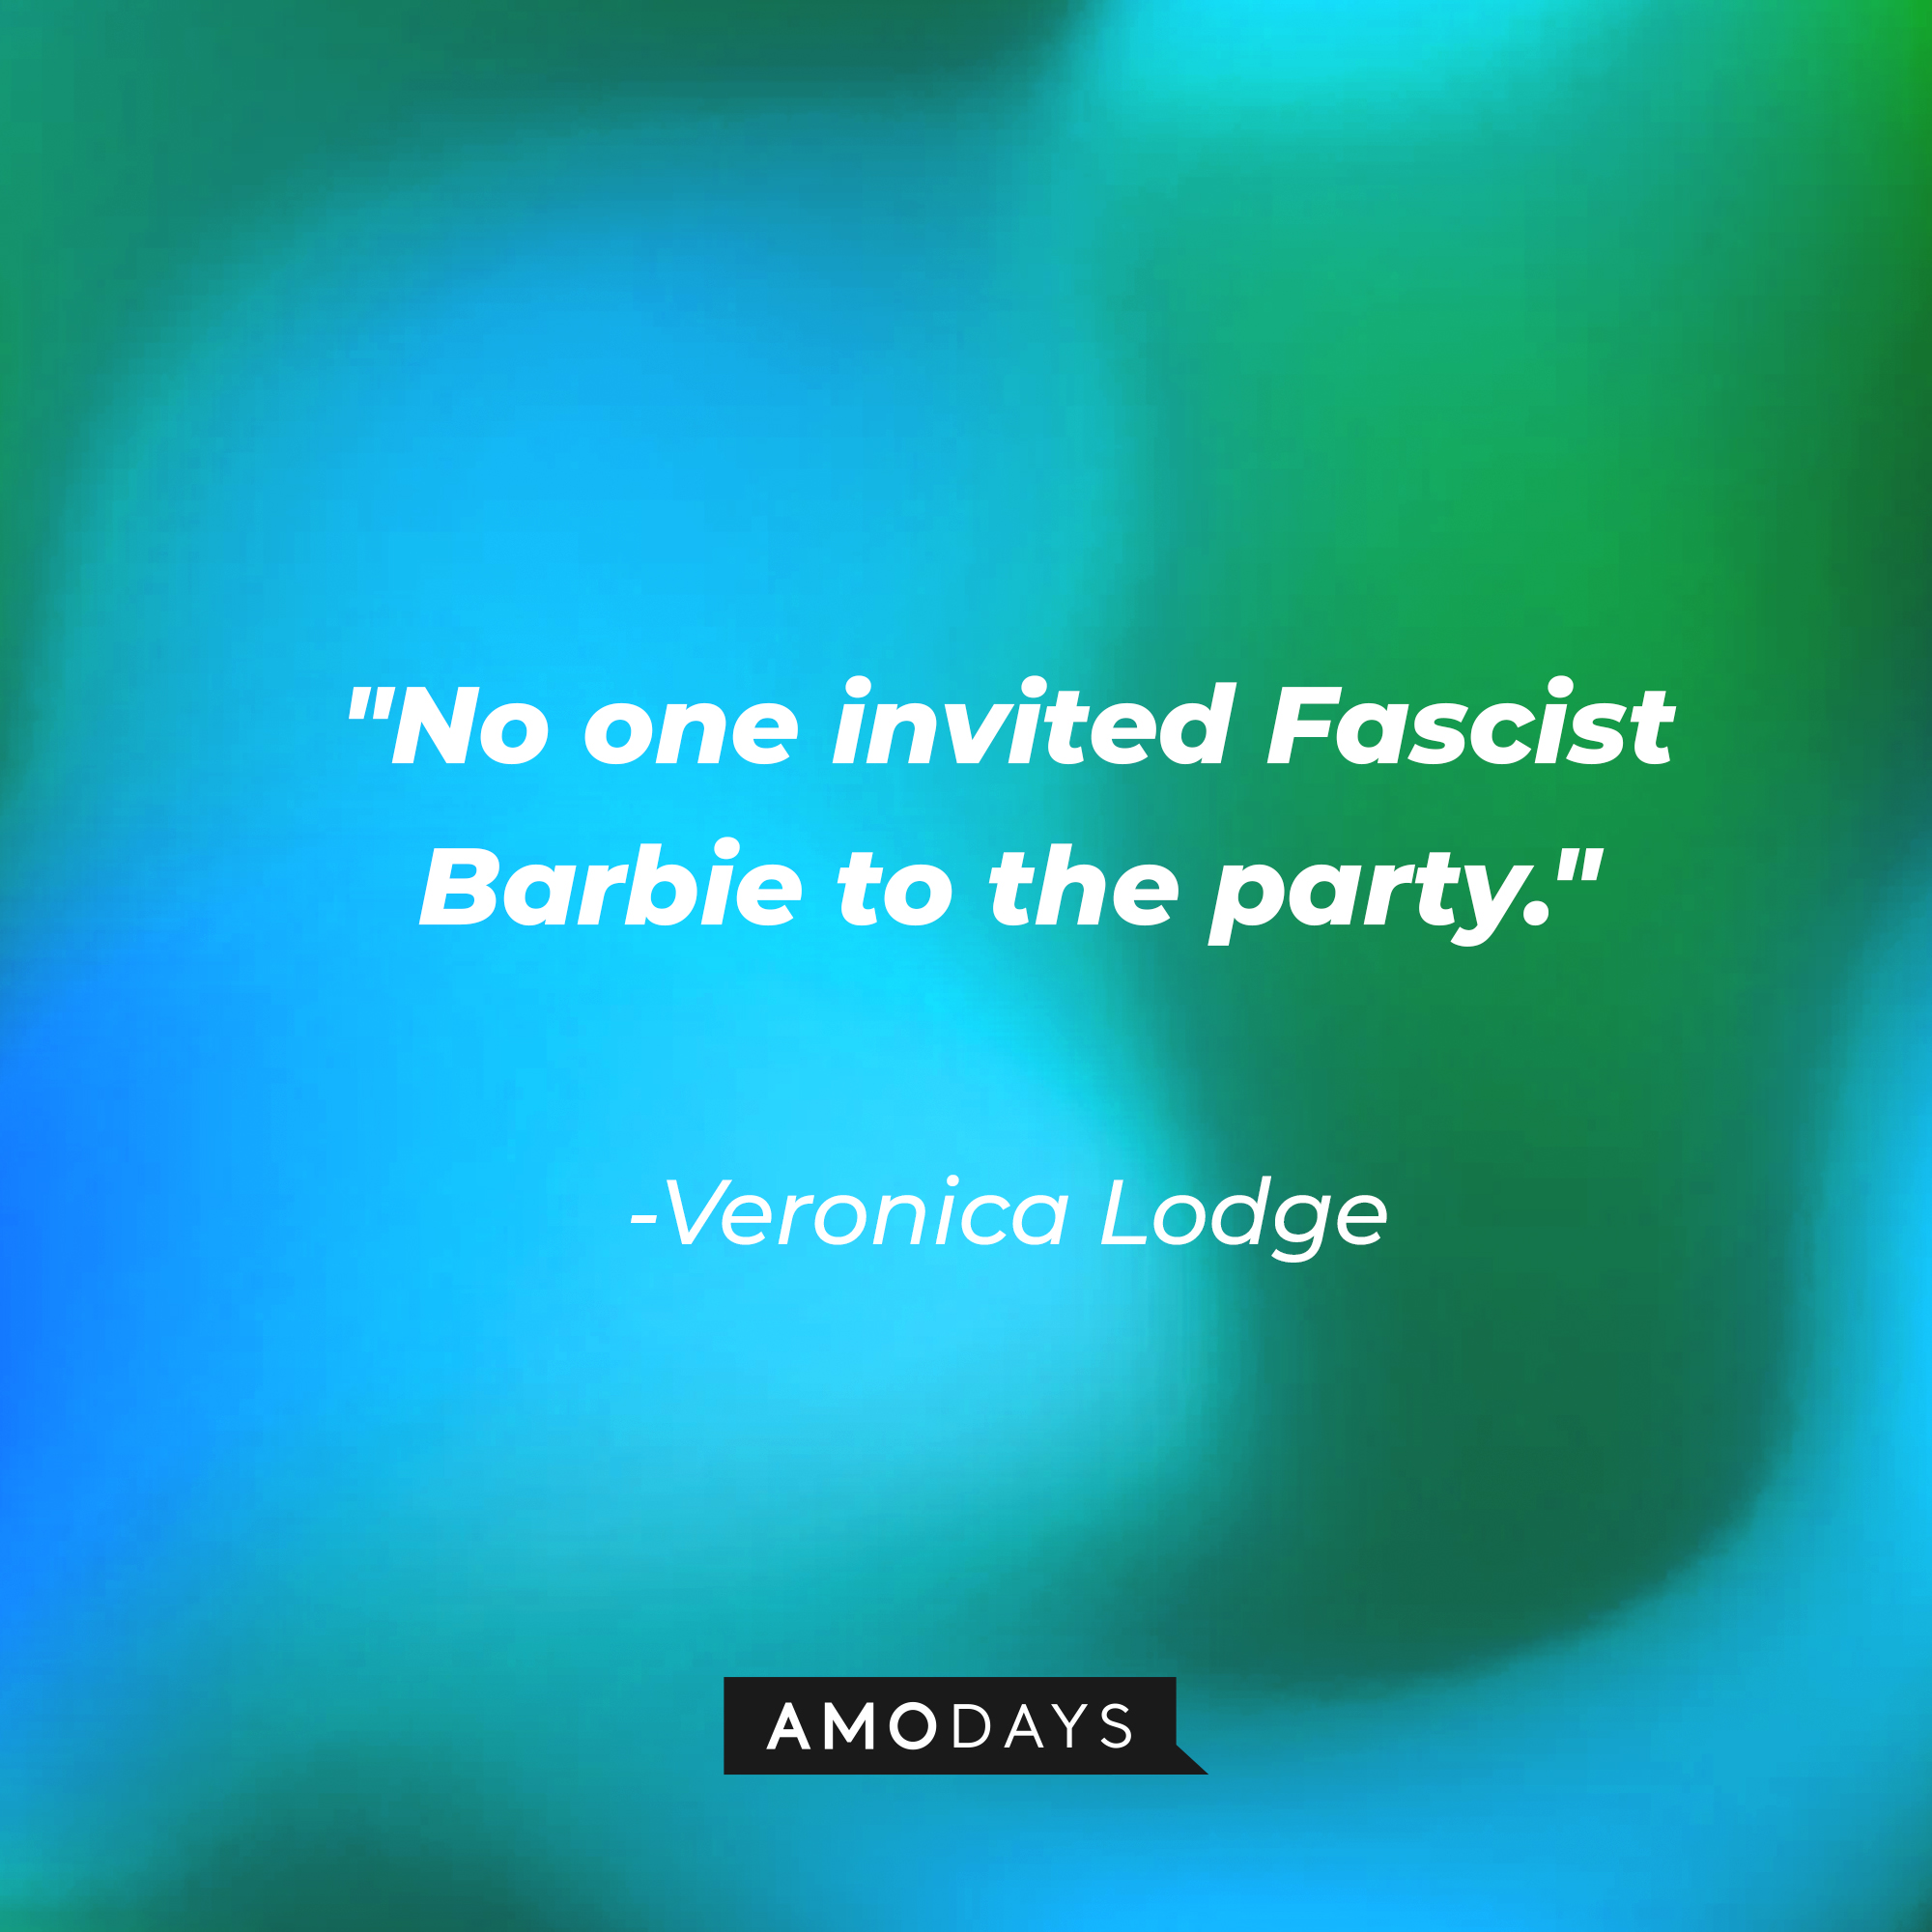 Veronica Lodge's quote: "No one invited Fascist Barbie to the party." | Source: AmoDays